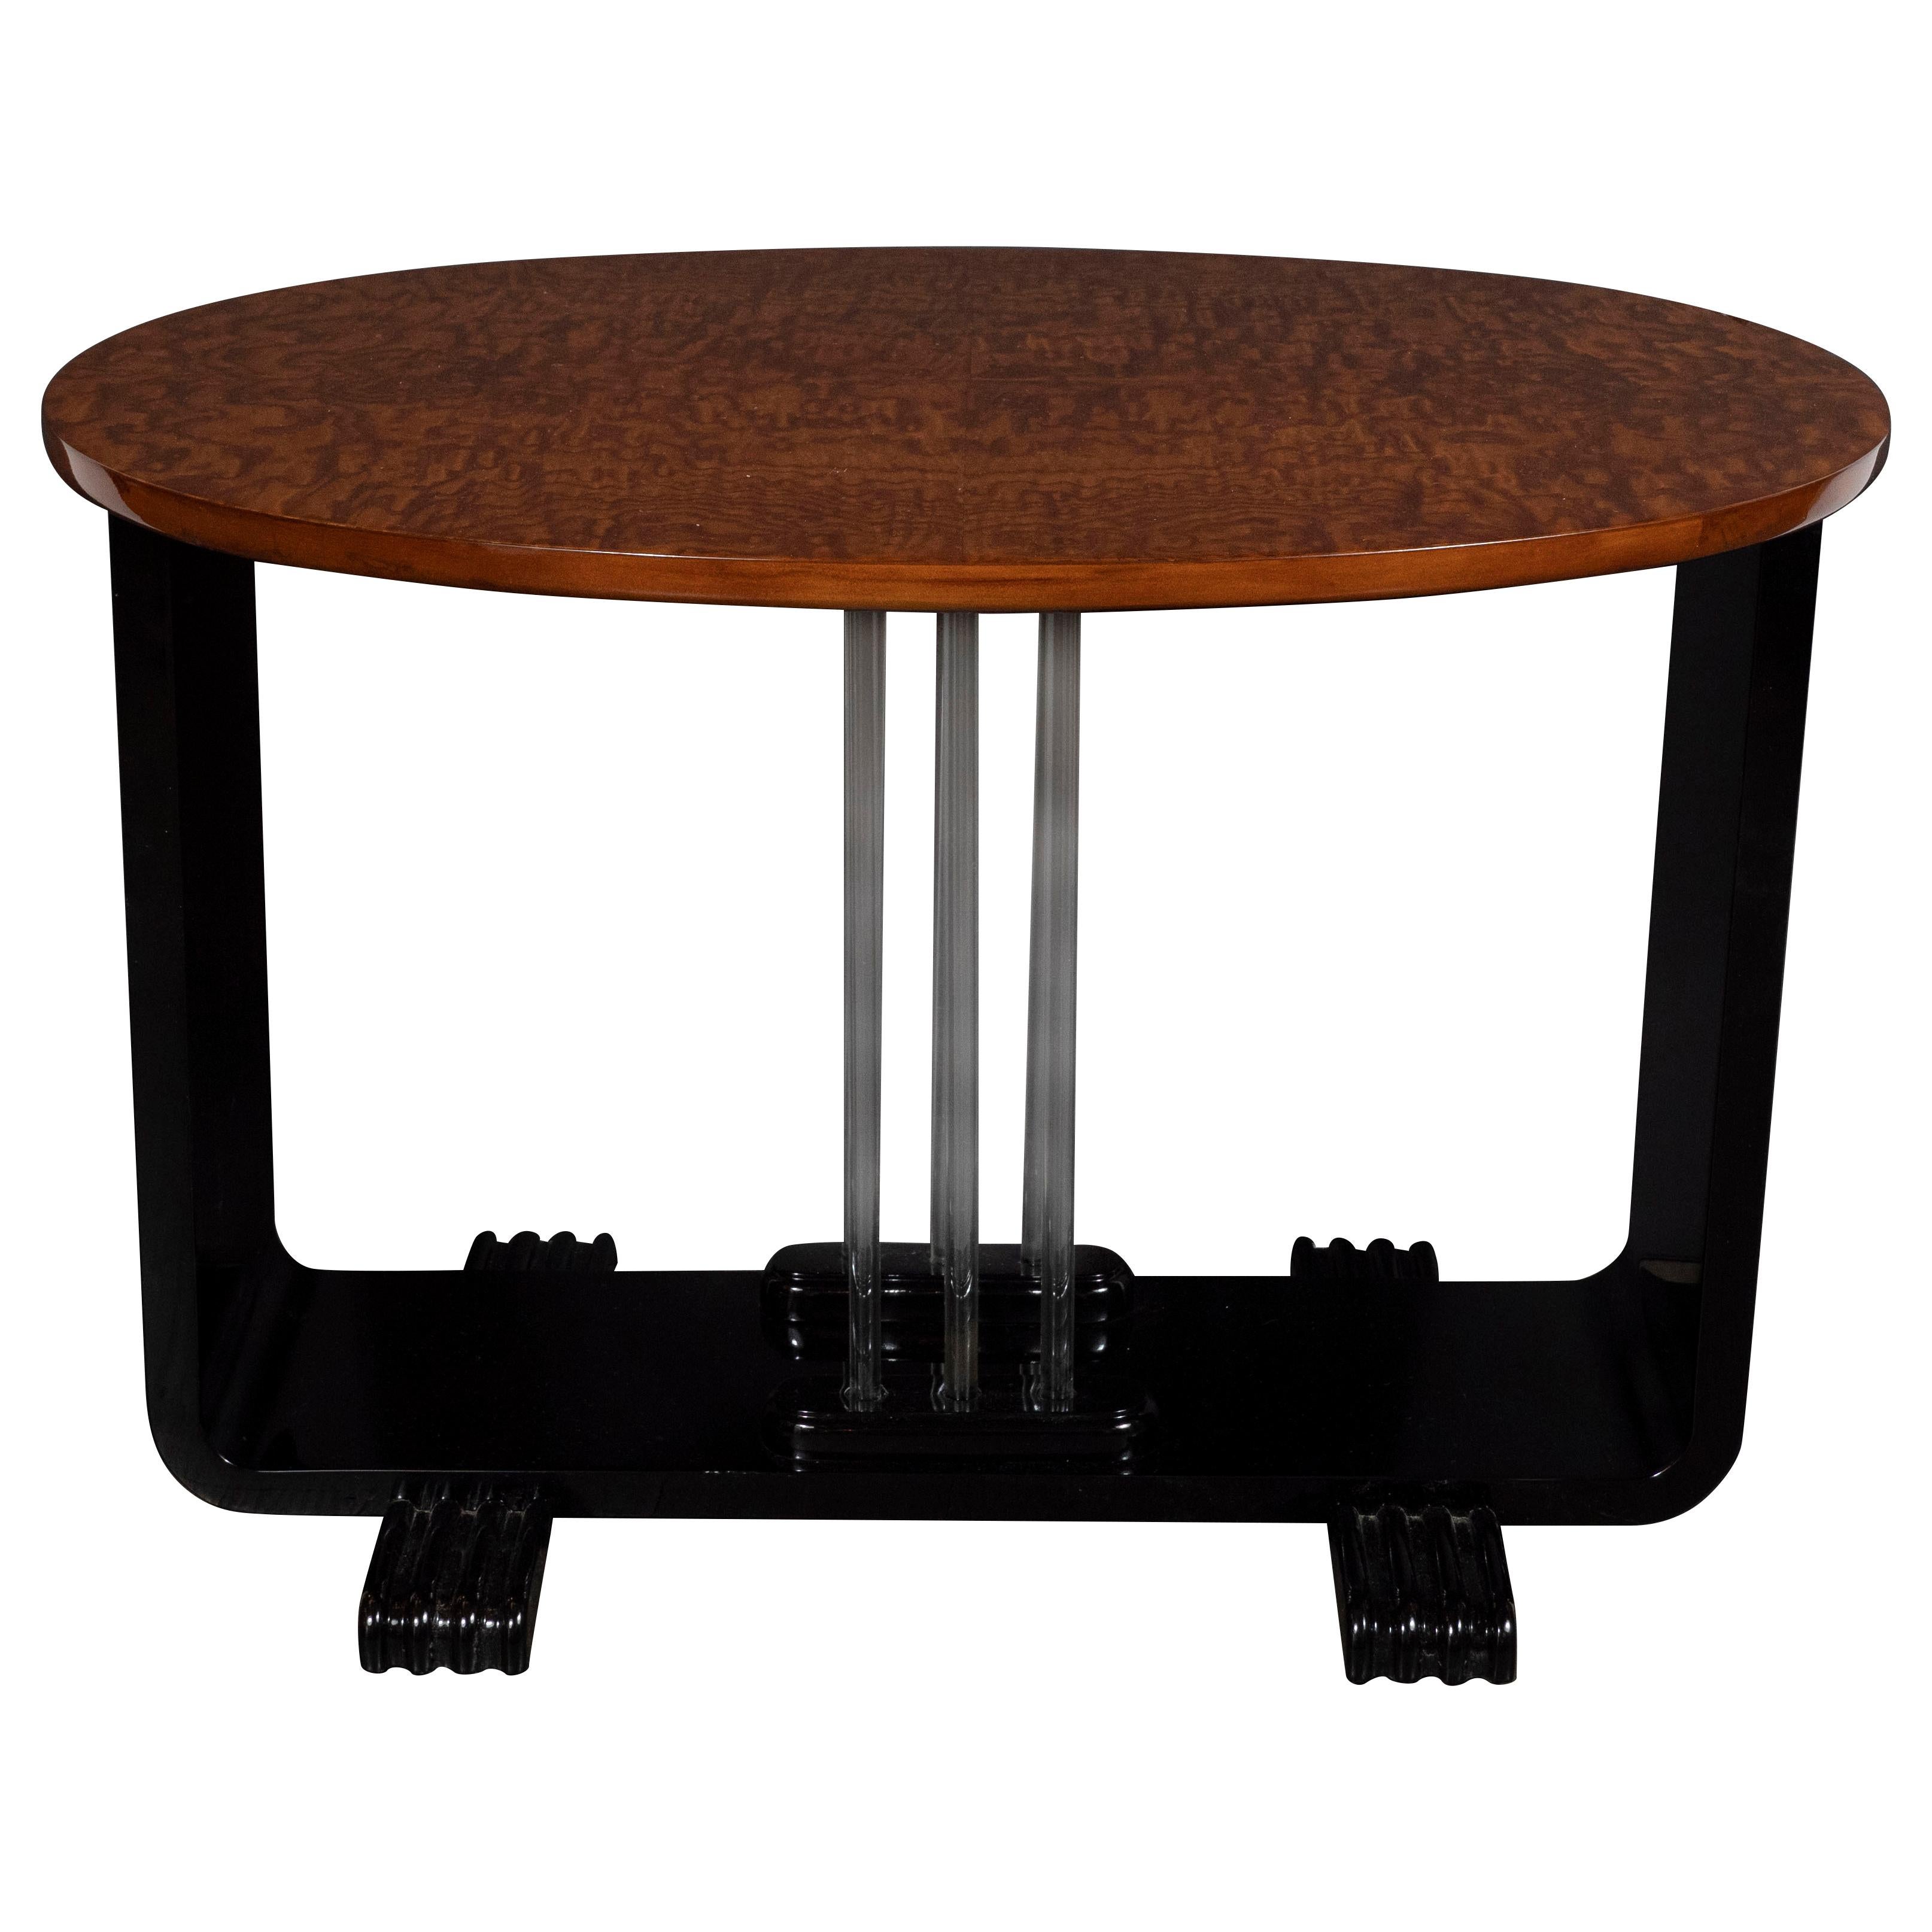 This refined Machine Age Art Deco side table was realized in the United States, circa 1935. It features an oval burled elm top offering a stunning grain; and a U-Form composed of two black lacquer streamlined supports that sit on reeded streamlined